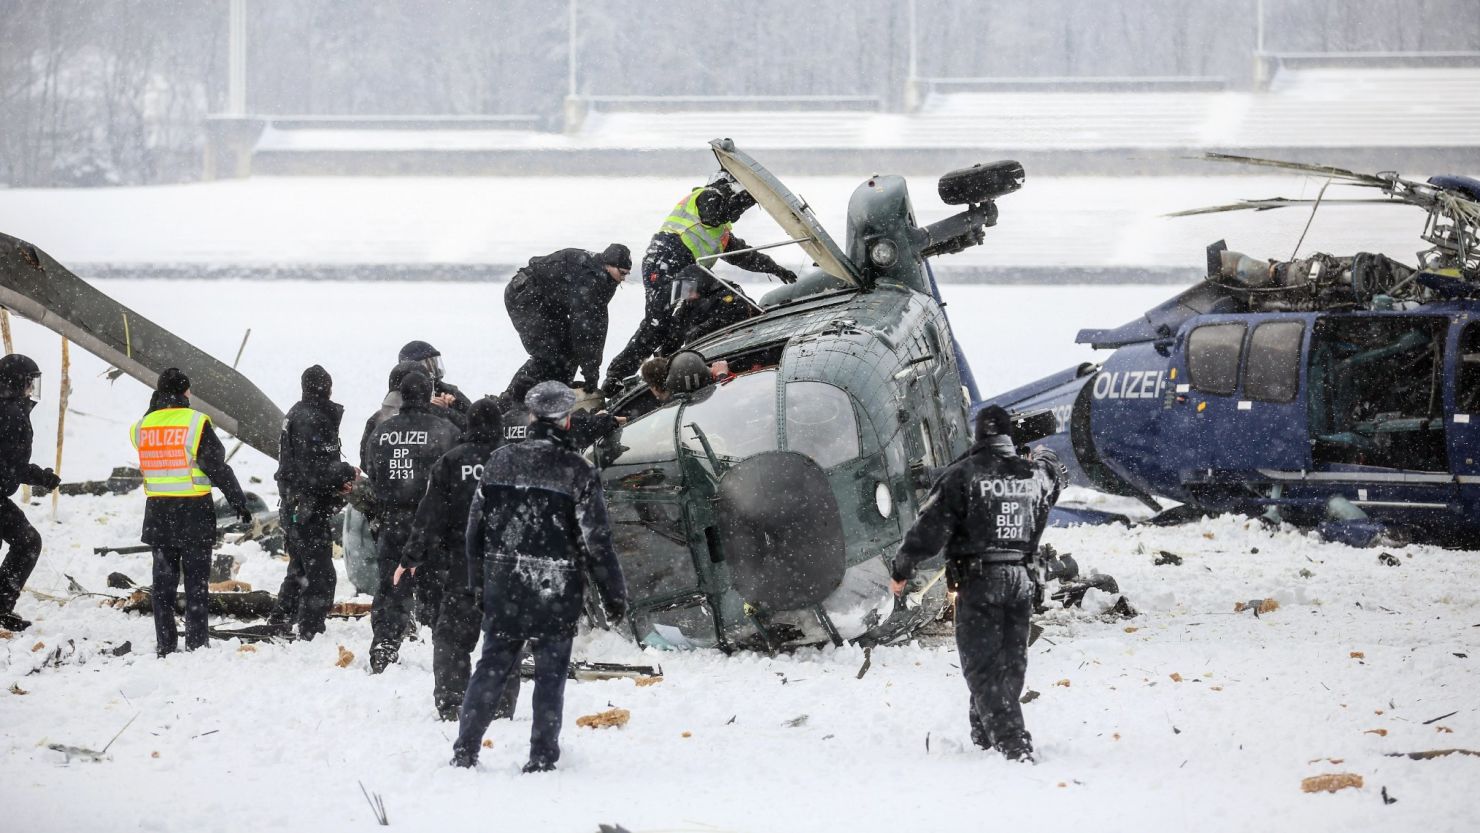 Two police helicopters crashed near the Olympic stadium in Berlin after a training exercise Thursday.